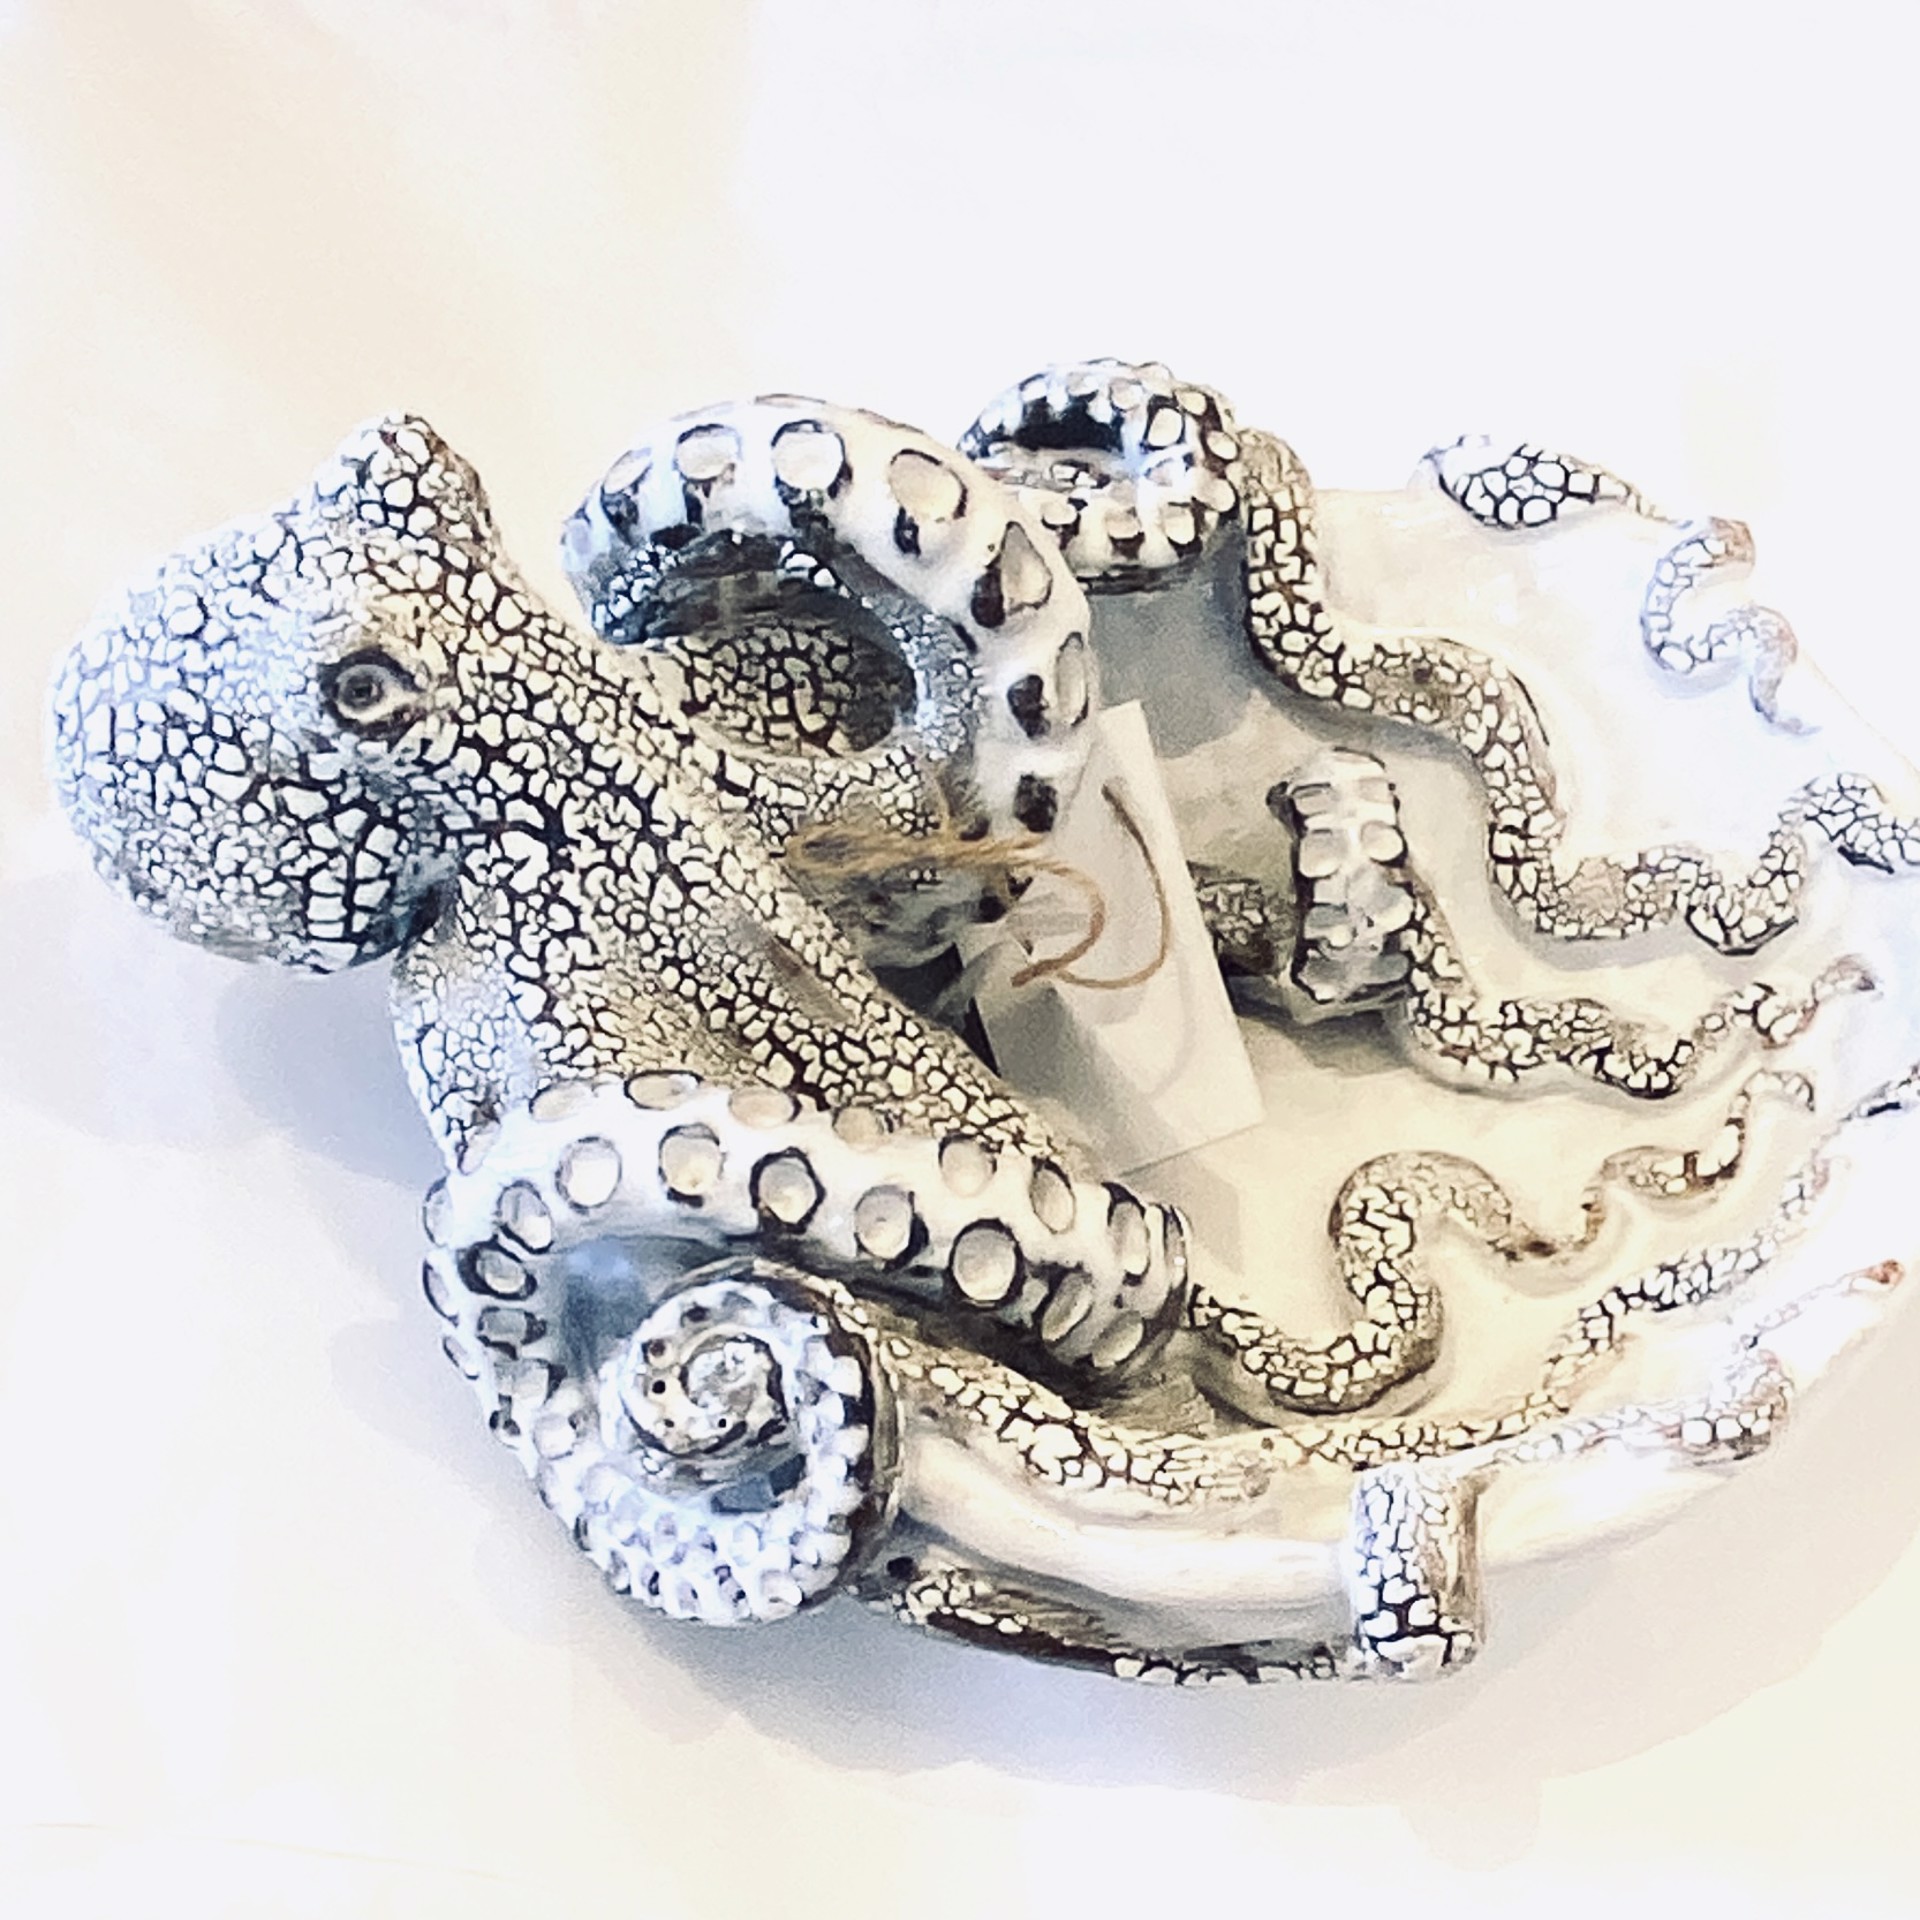 Large Octopus Bowl SG23-49 by Shayne Greco